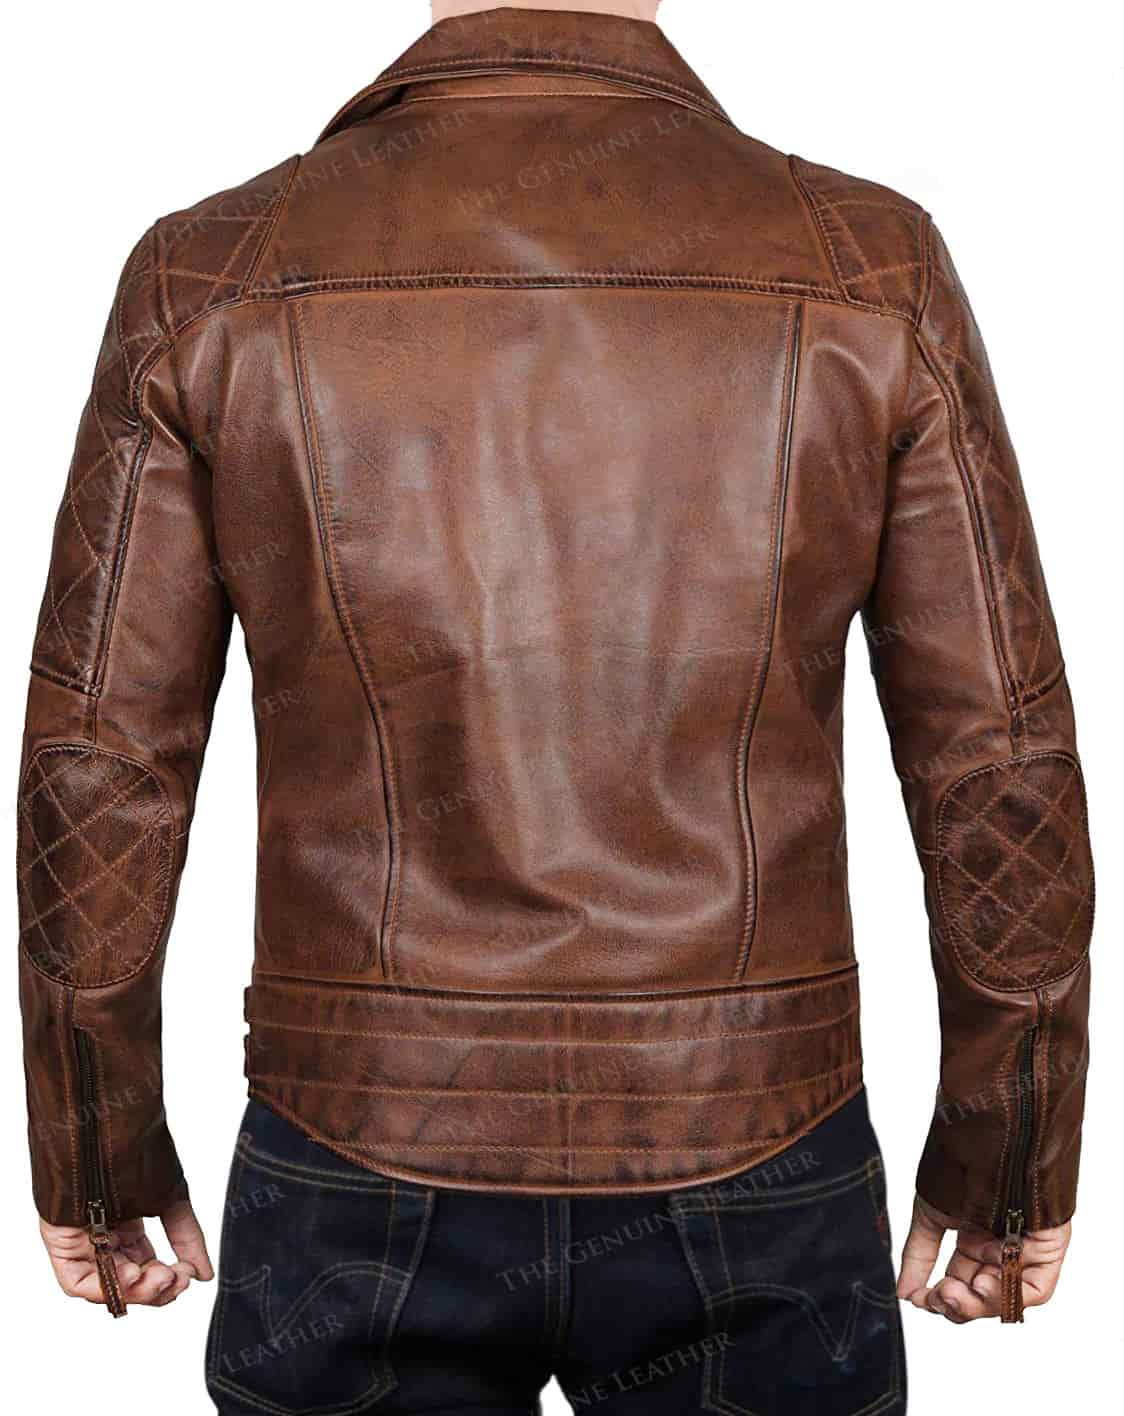 Brown-quilted-leather-jacket-for-men.jpg